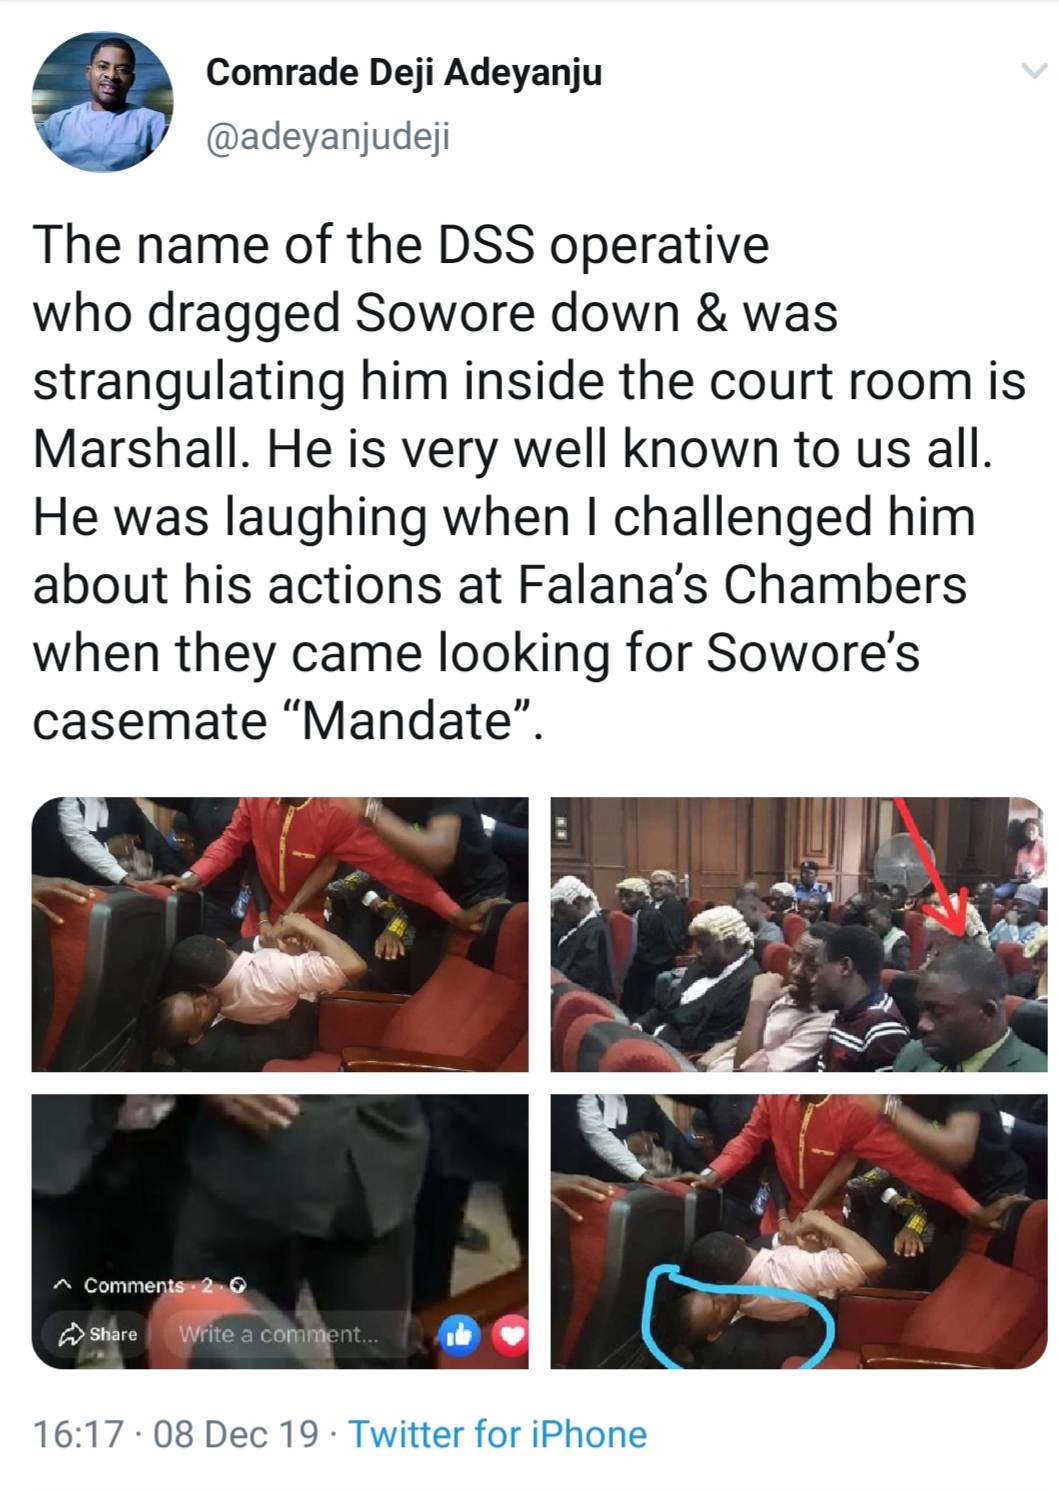 EXPOSED: See the DSS operative who knocked Sowore down in Courtroom